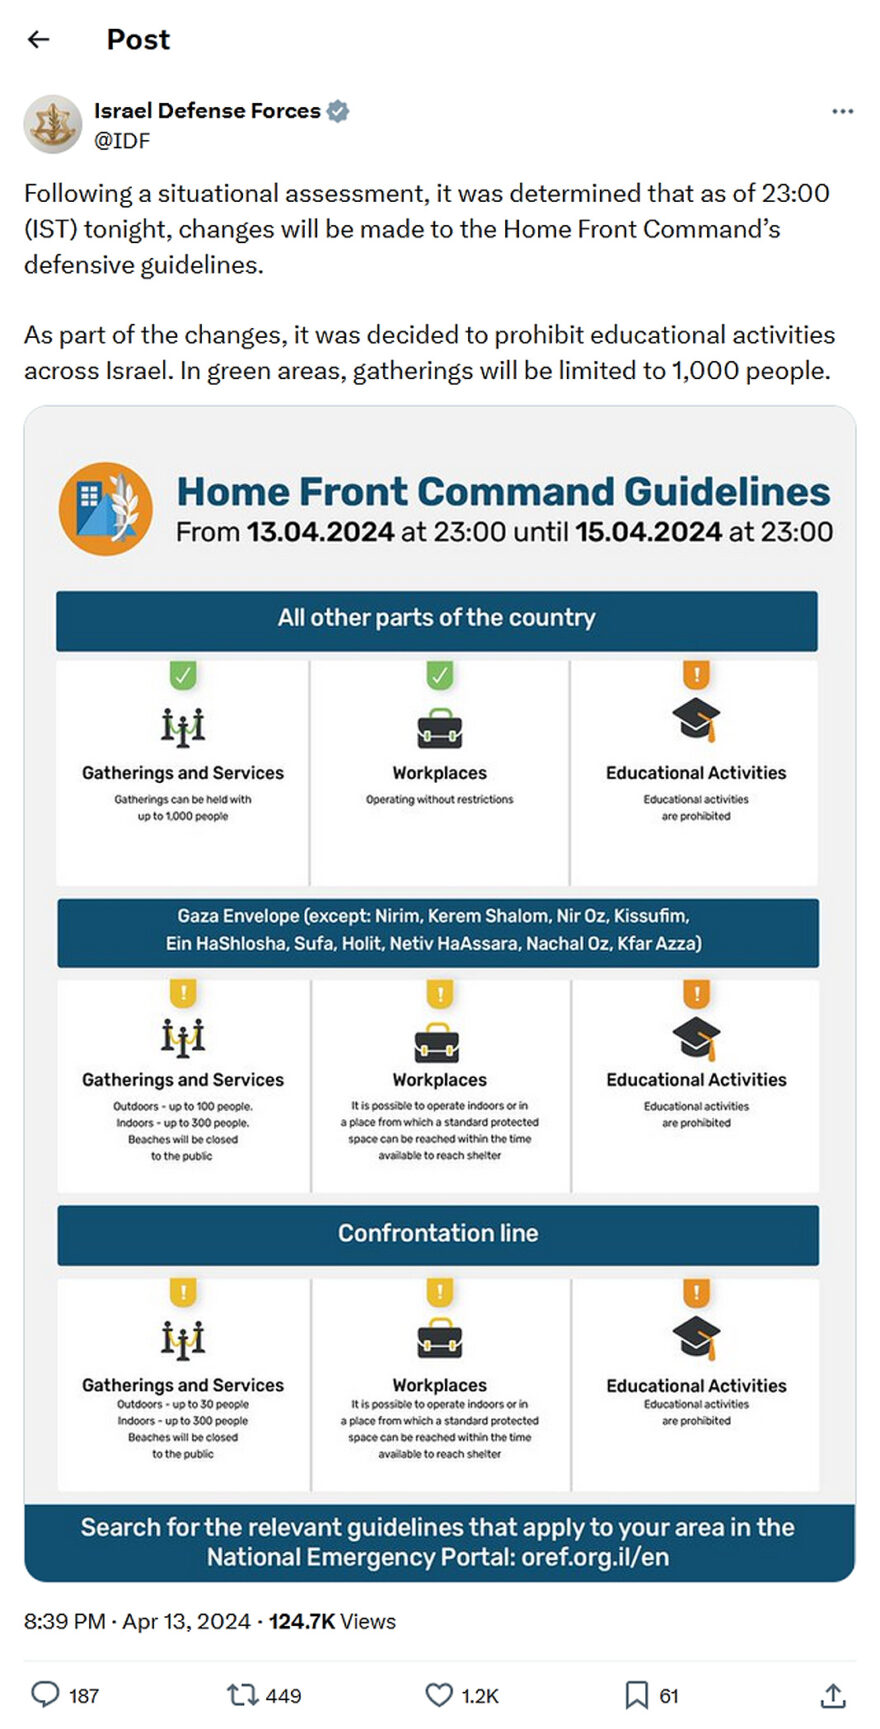 Israel Defense Forces-tweet-13April2024-Changes to the Home Front Command’s defensive guidelines 13-15April2024